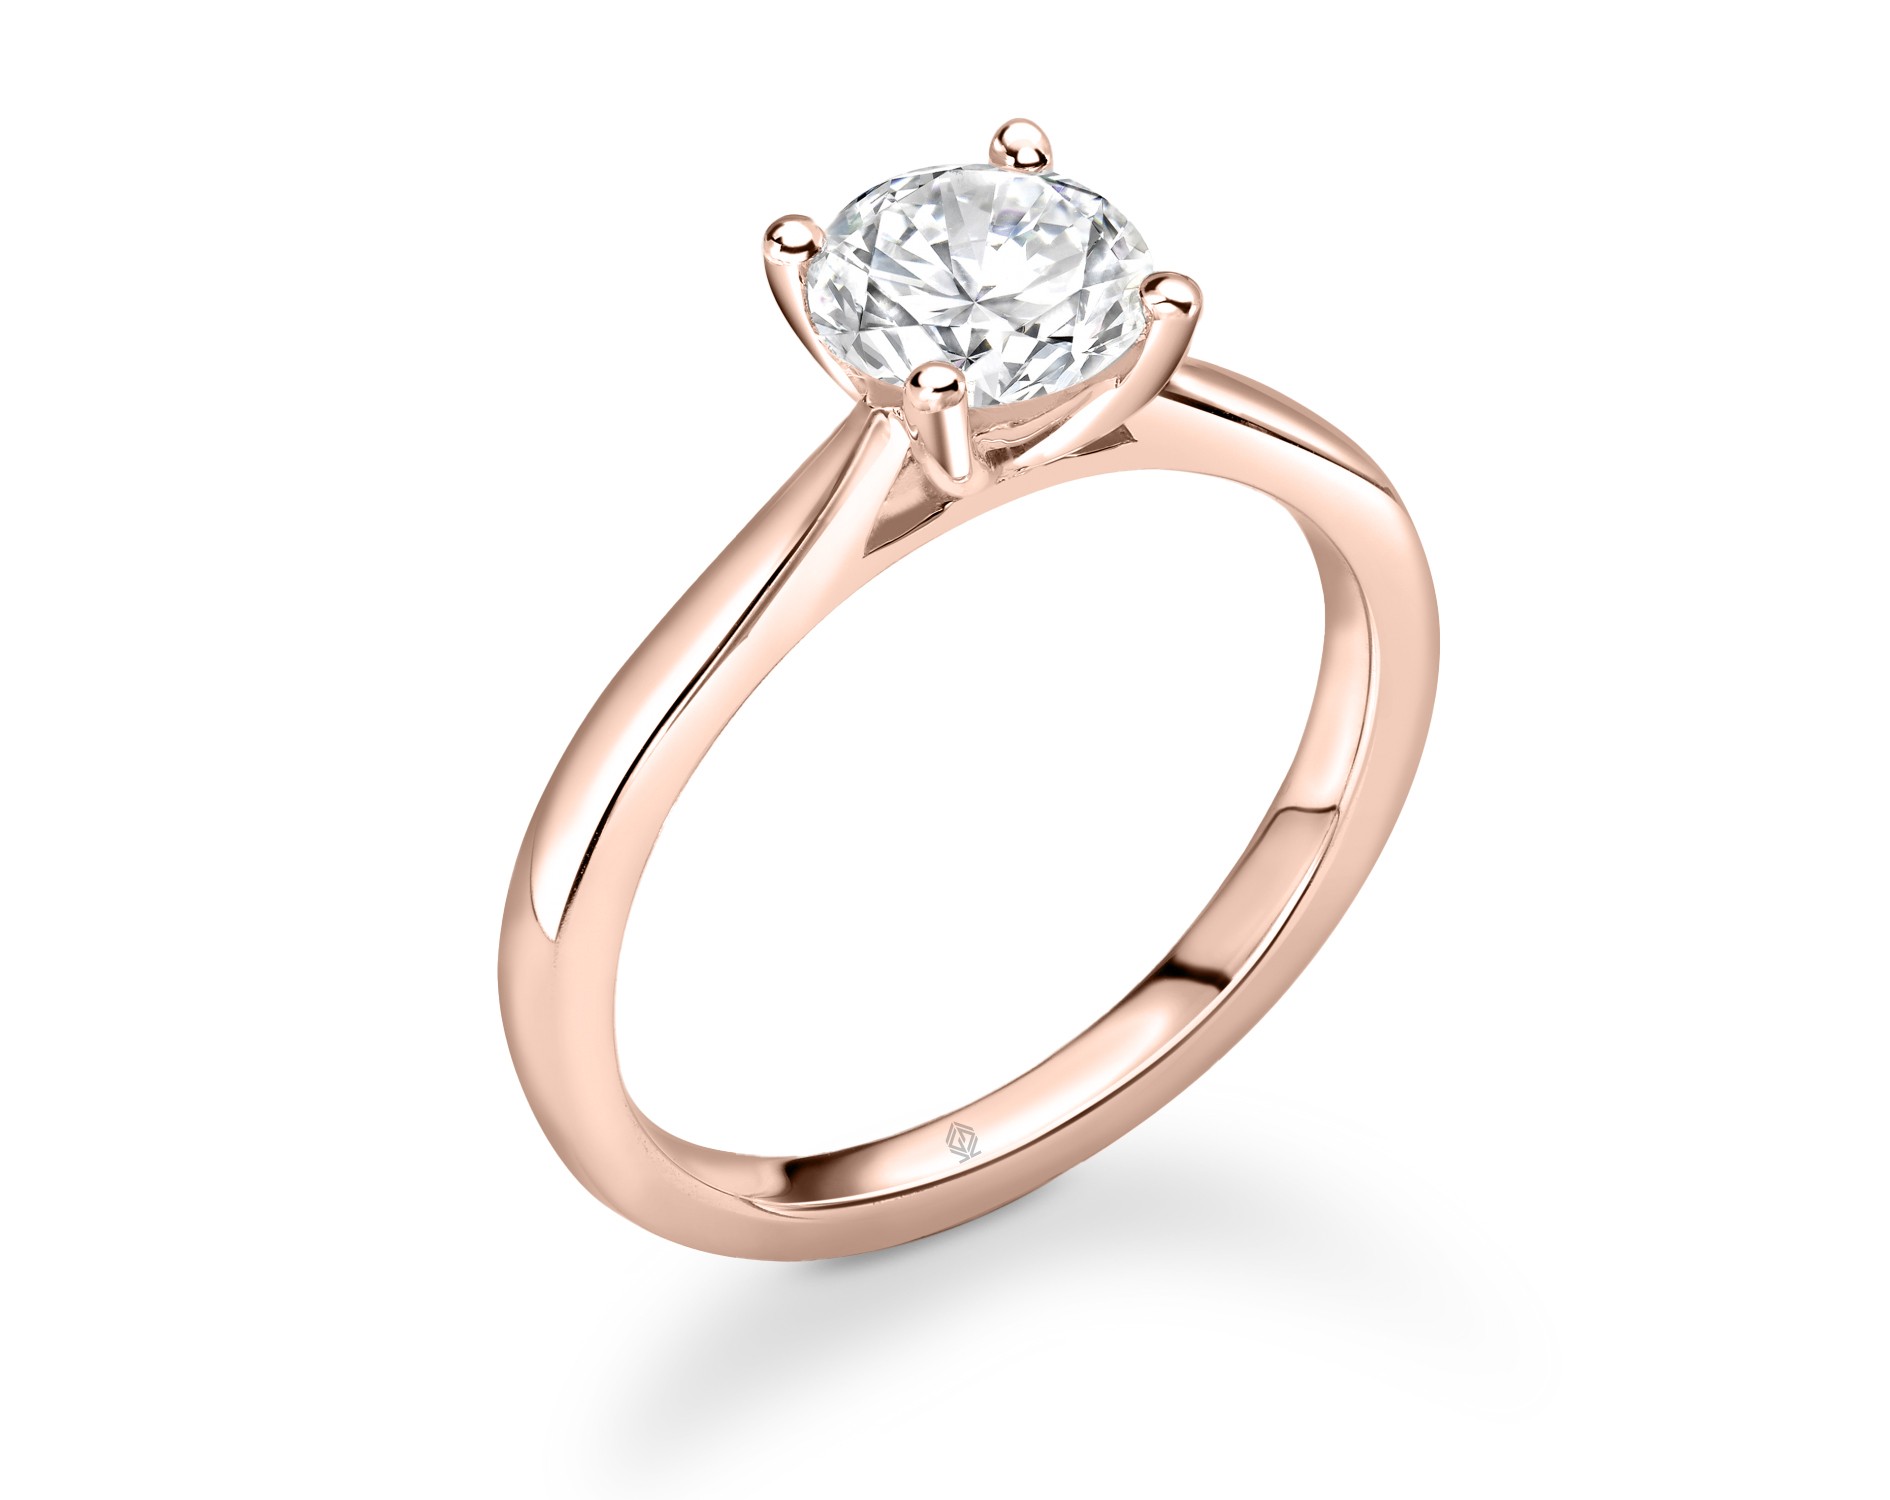 18K ROSE GOLD GOLD 4 PRONGS SOLITAIRE ROUND CUT DIAMOND ENGAGEMENT RING